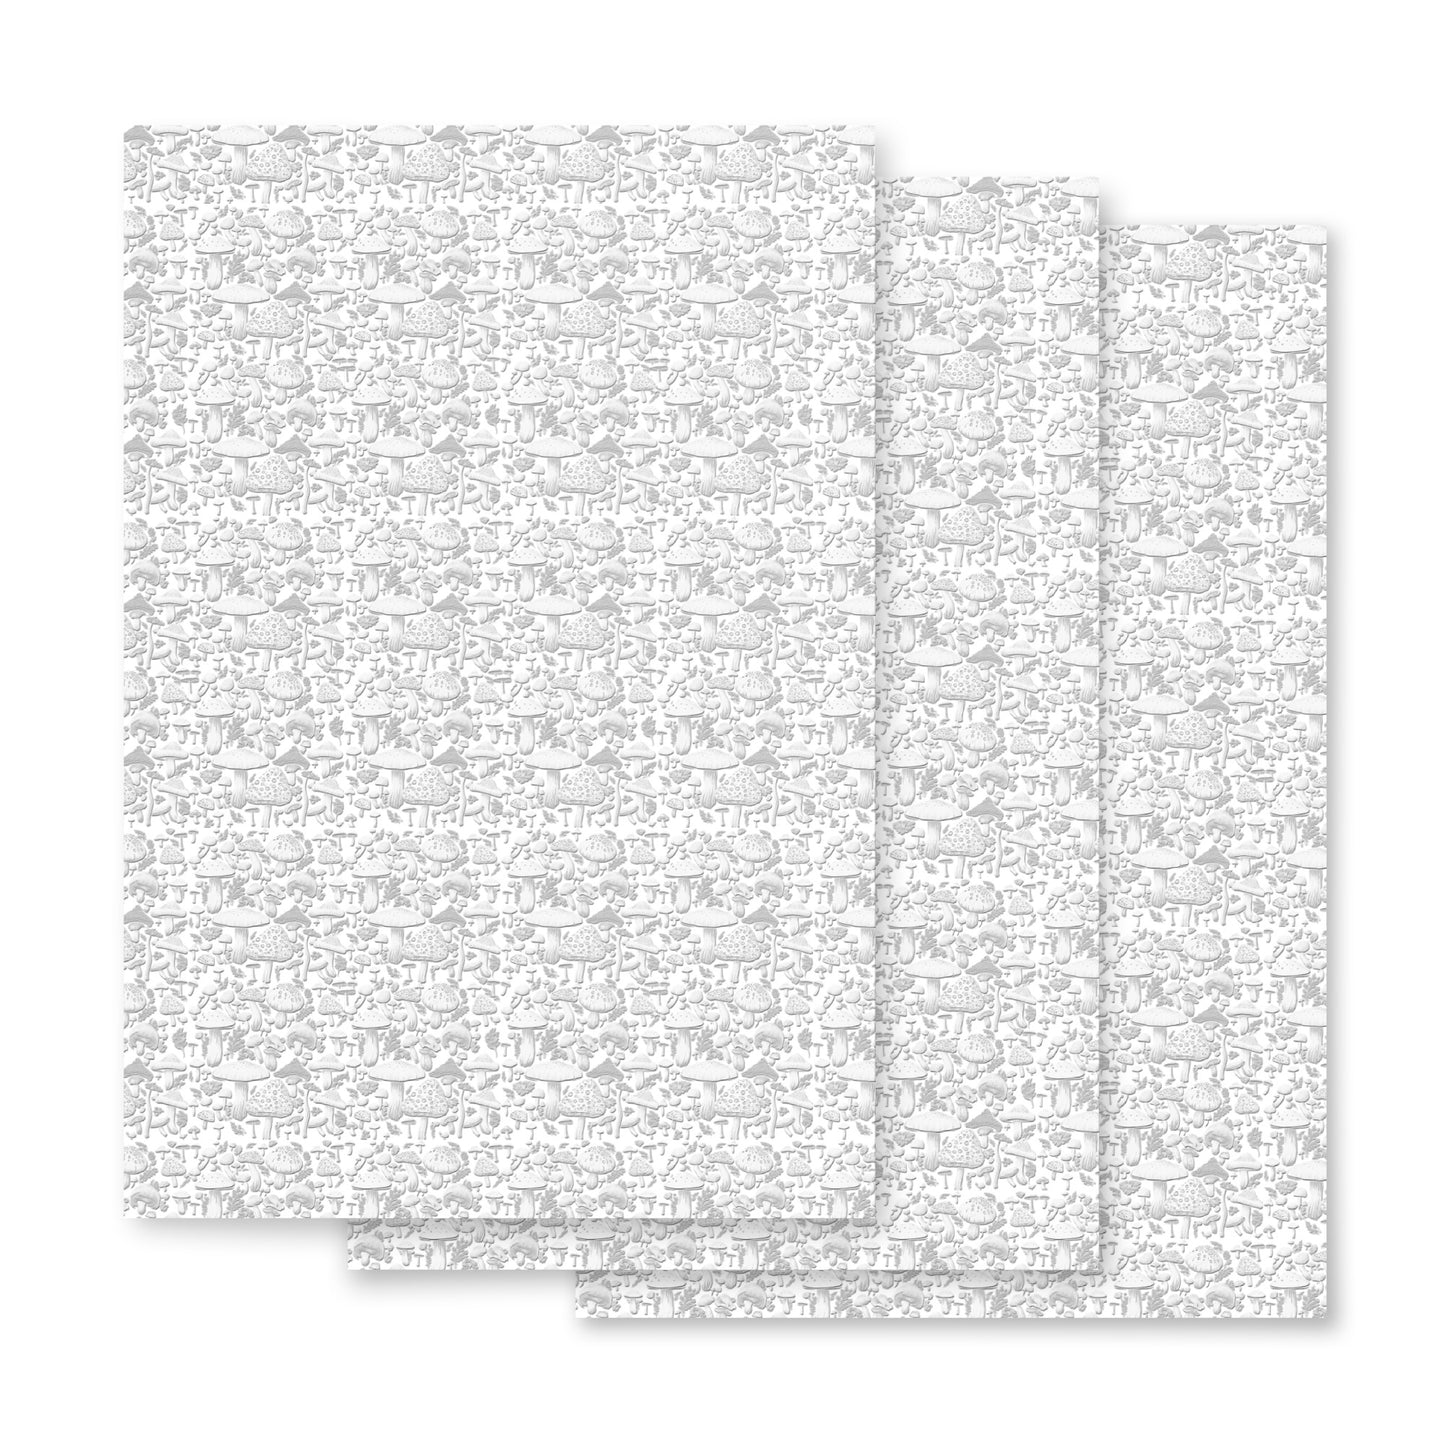 White Mushroooms Wrapping paper sheets